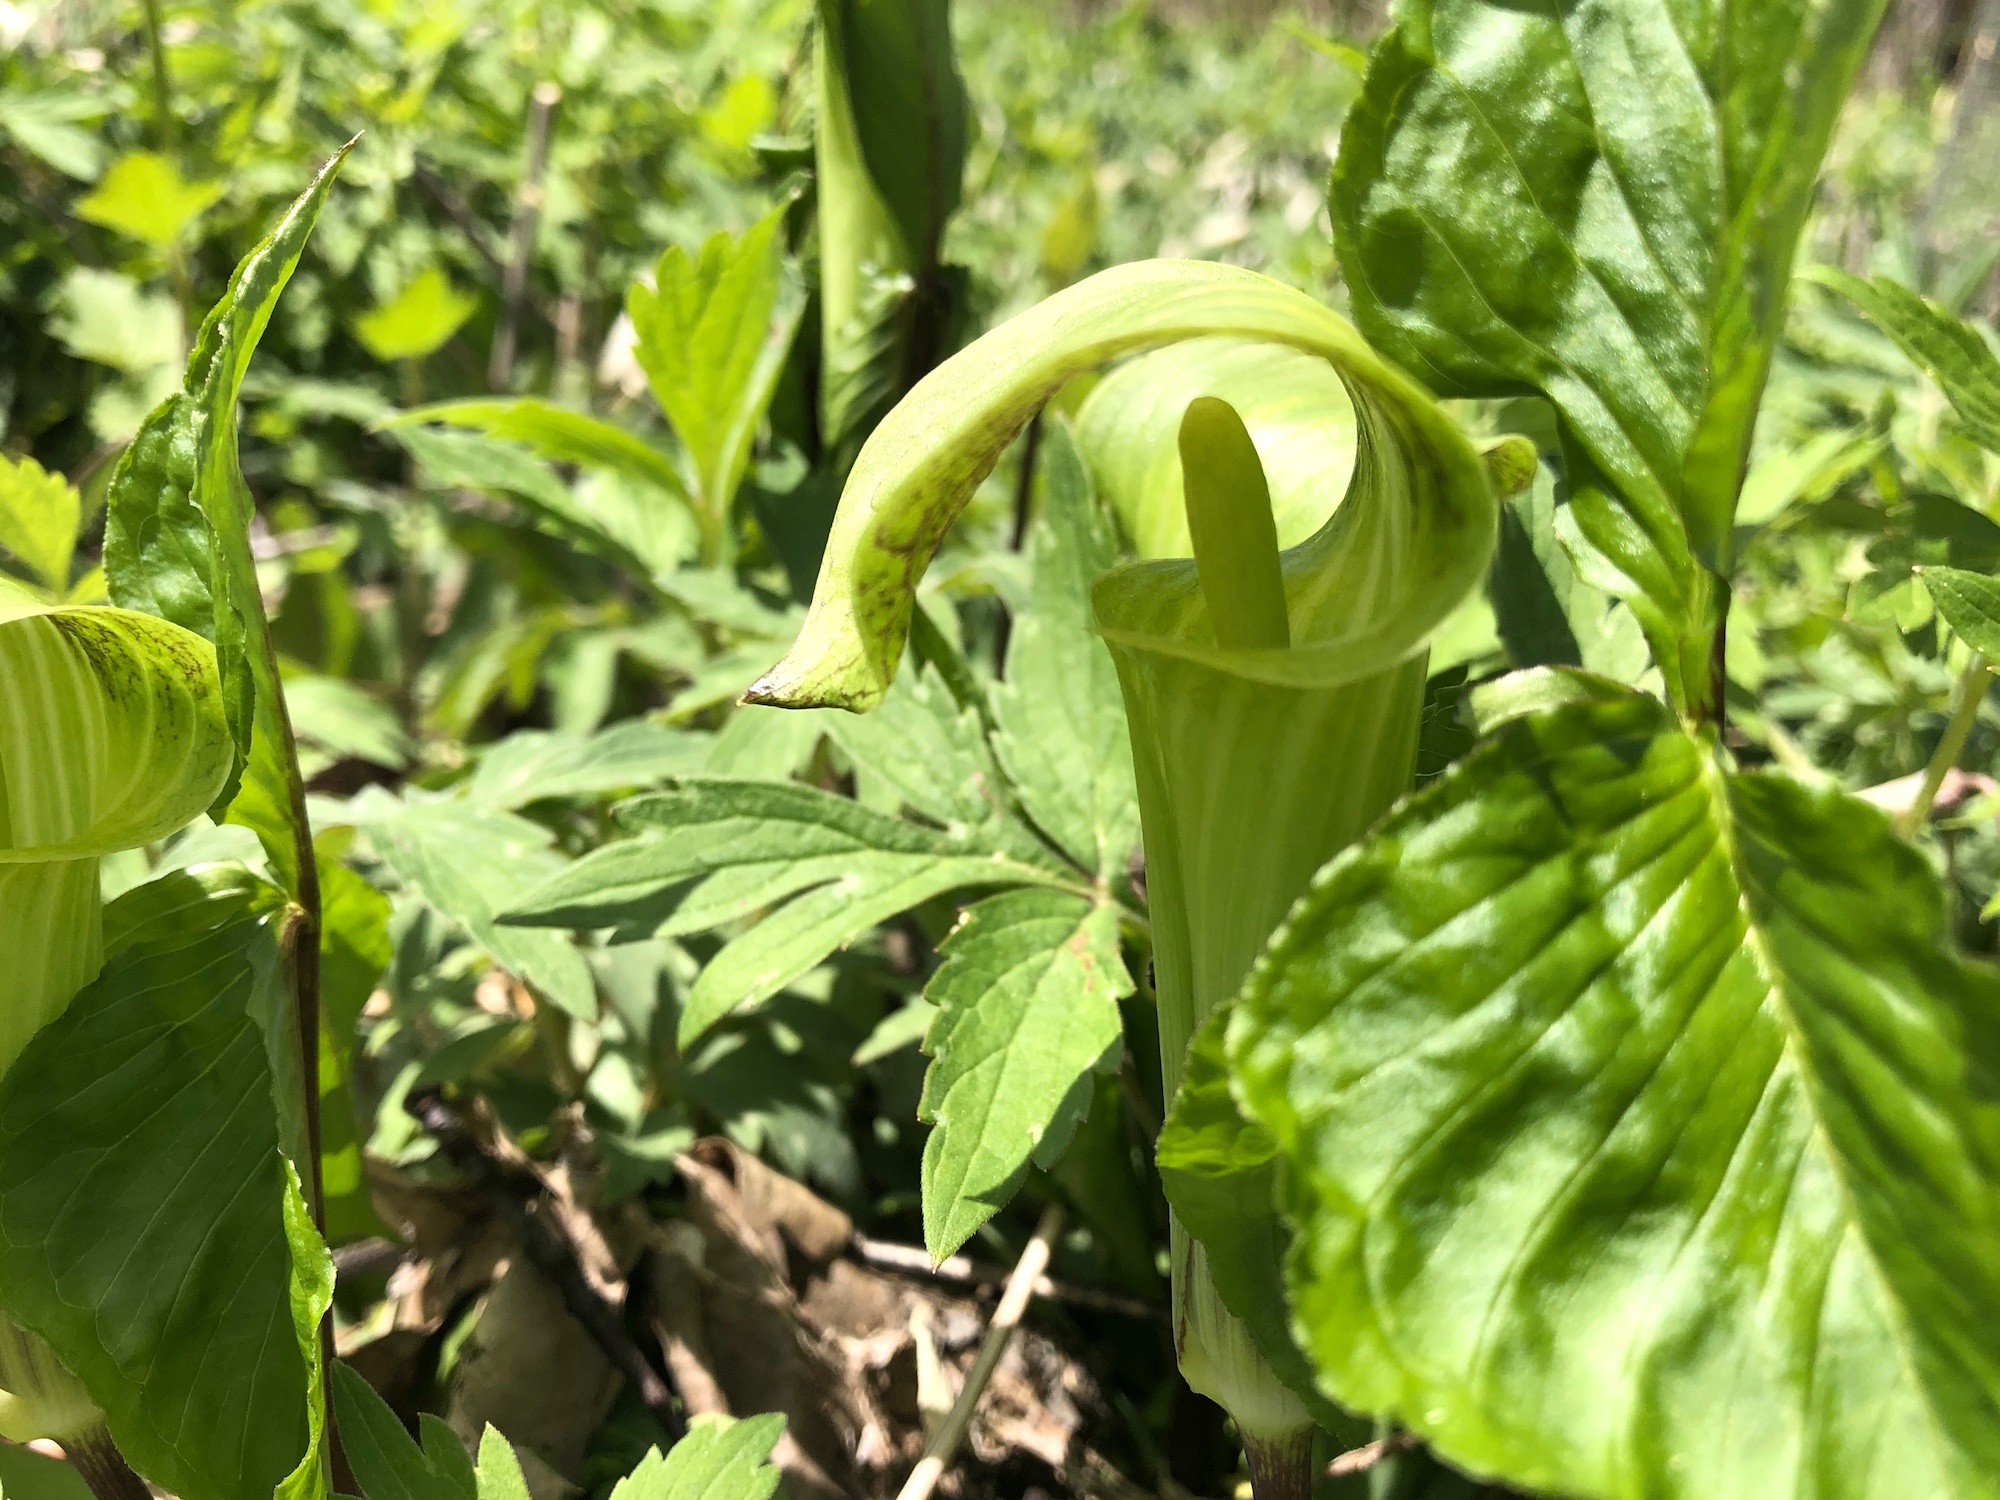 Jack-in-the-pulpit in the Oak Savanna on May 3, 2020.